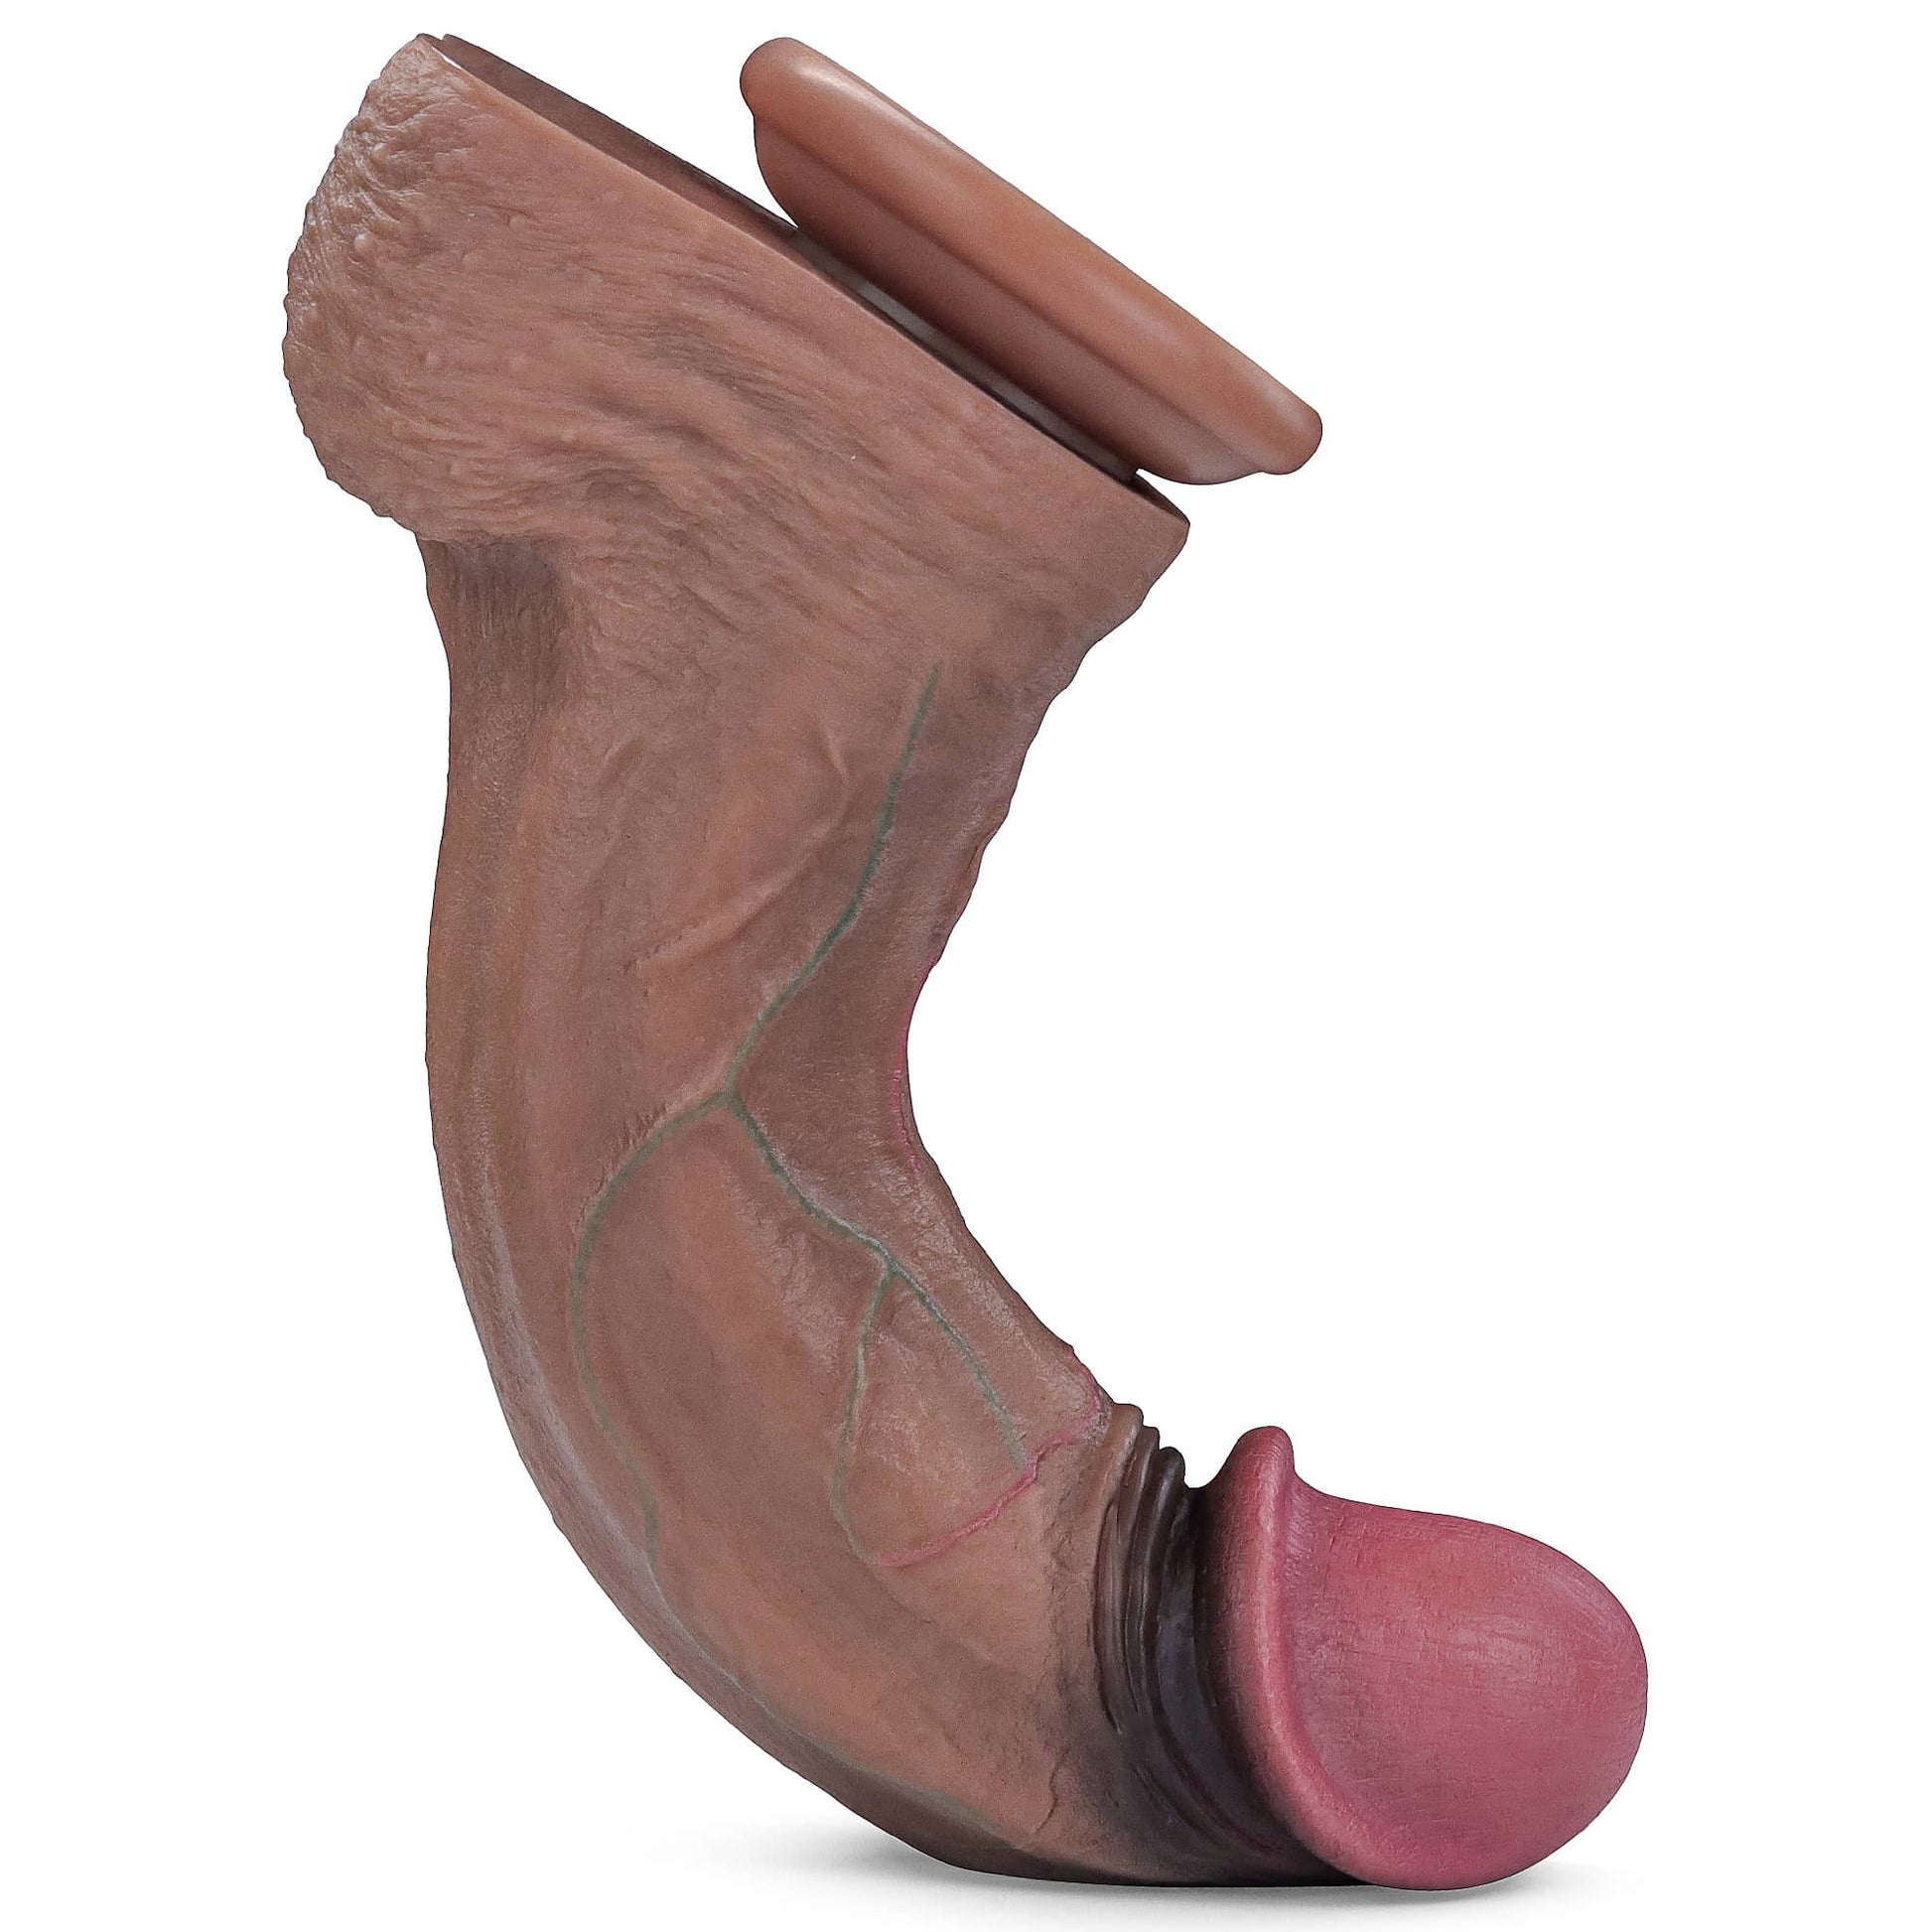 The 13 inches silicone realistic dildo bends ultra softly